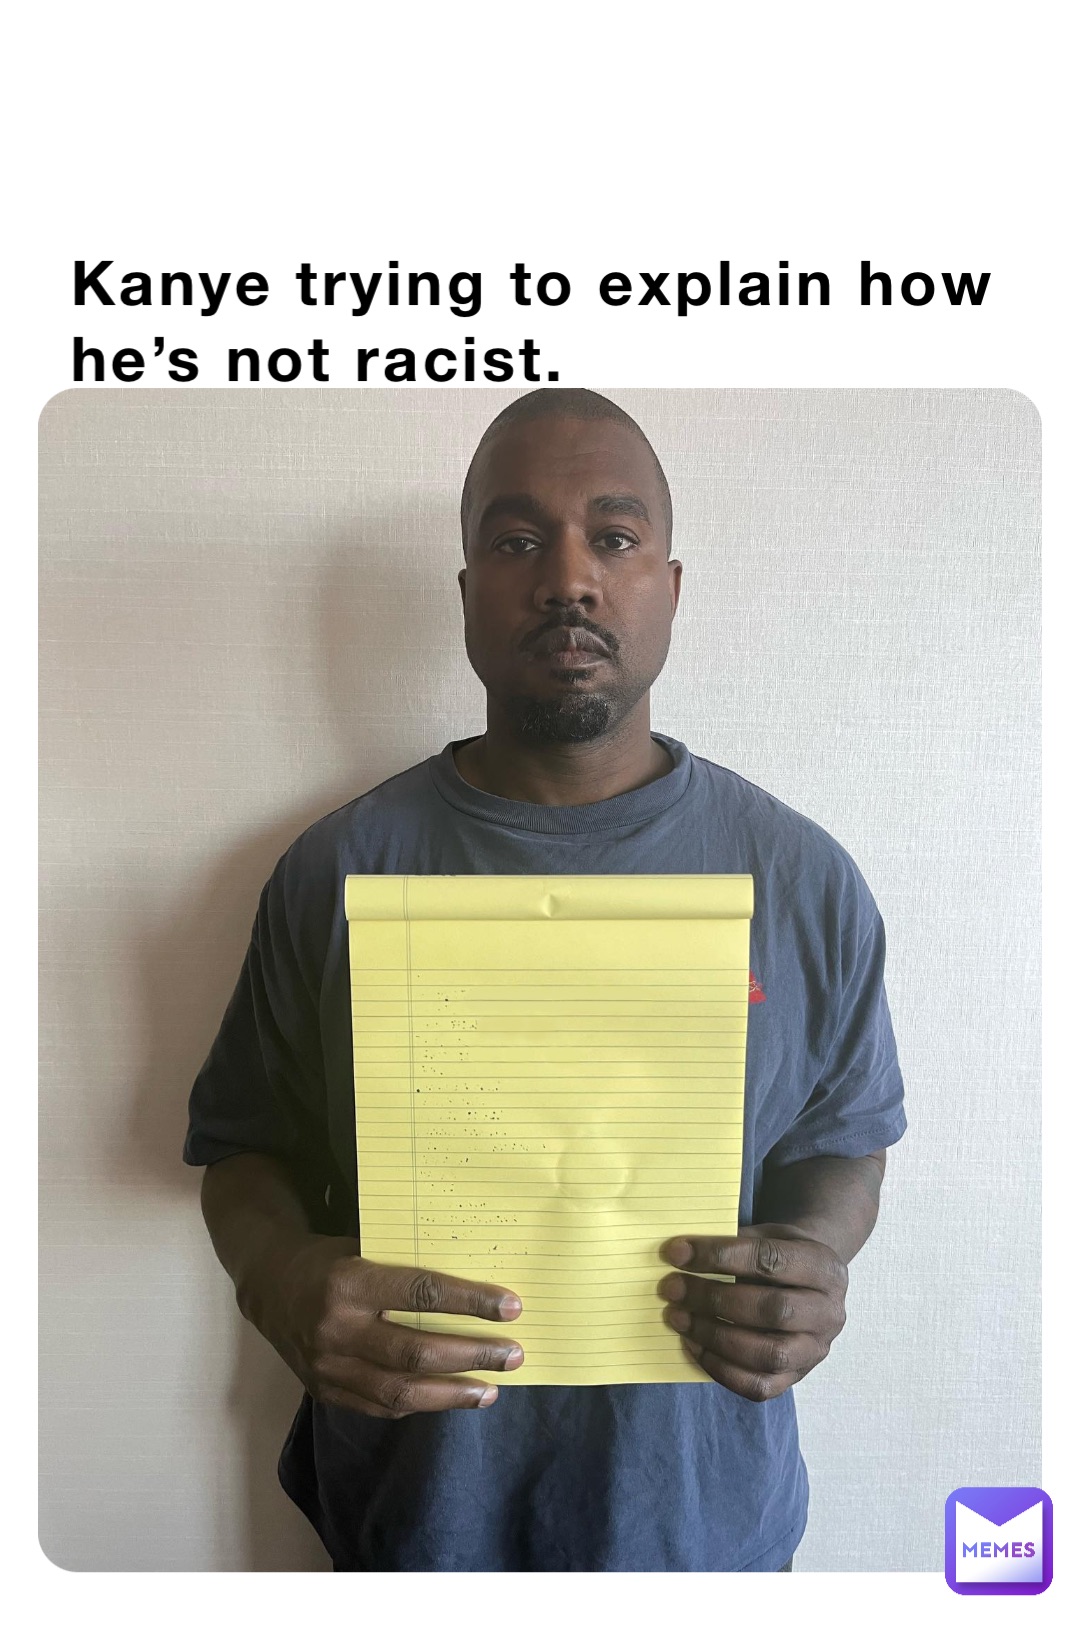 Kanye trying to explain how he’s not racist.